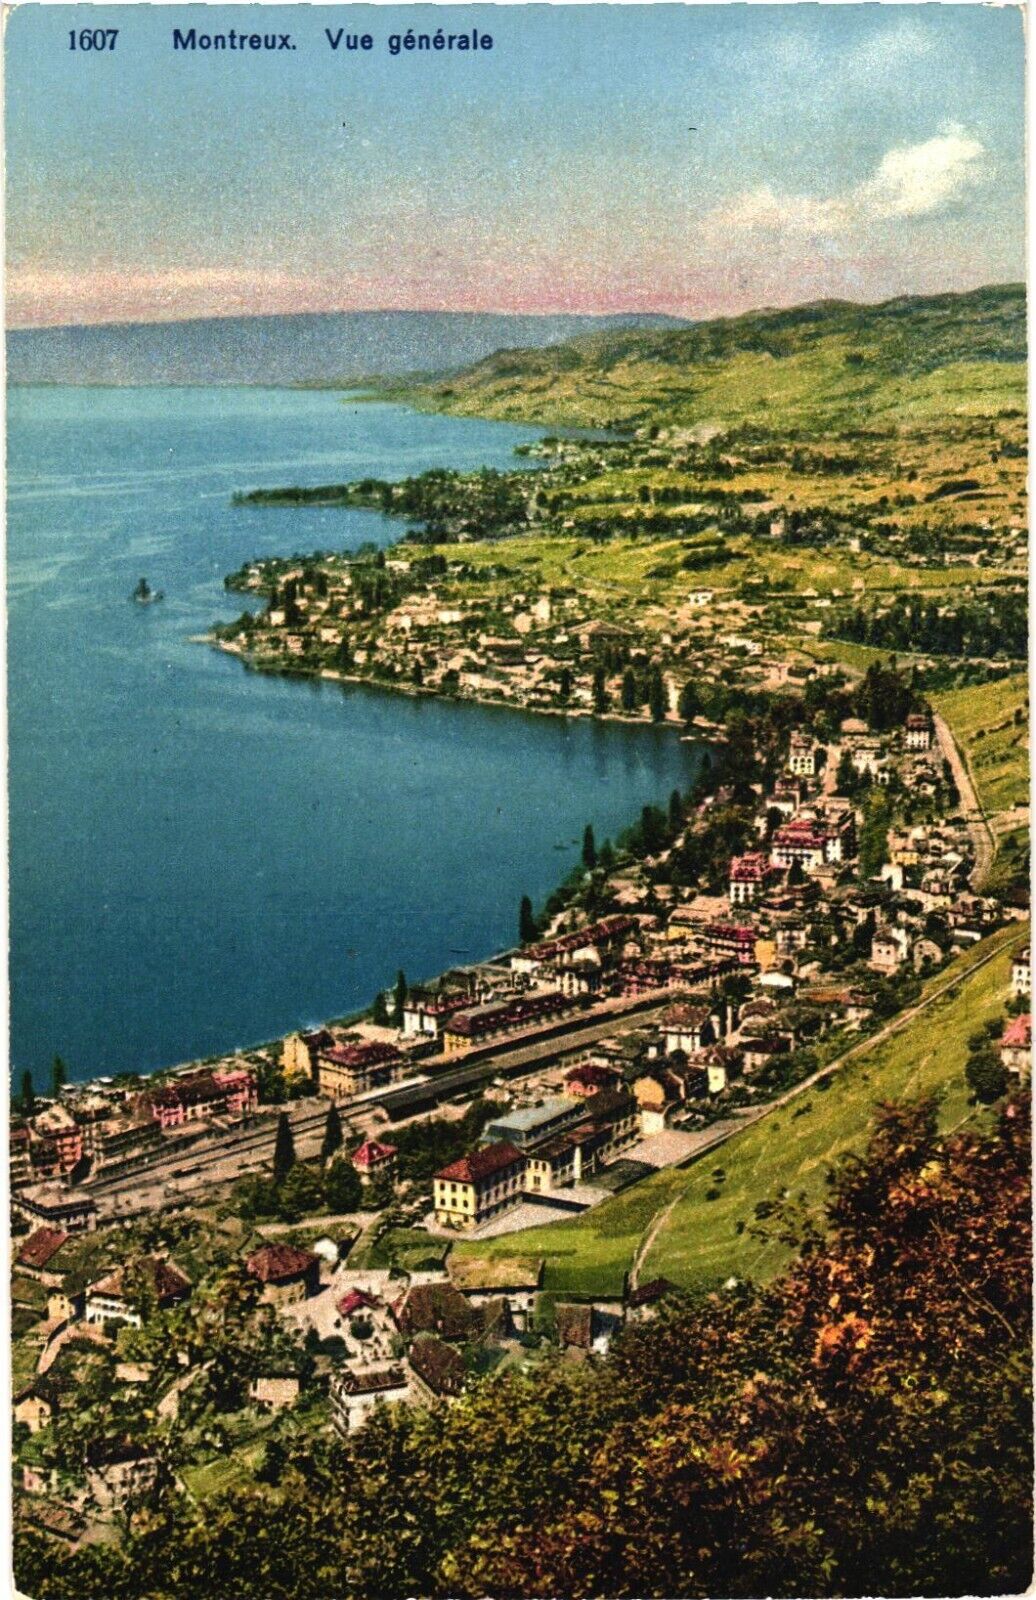 General View of The Town of Montreux on Lake Geneva, Switzerland Postcard